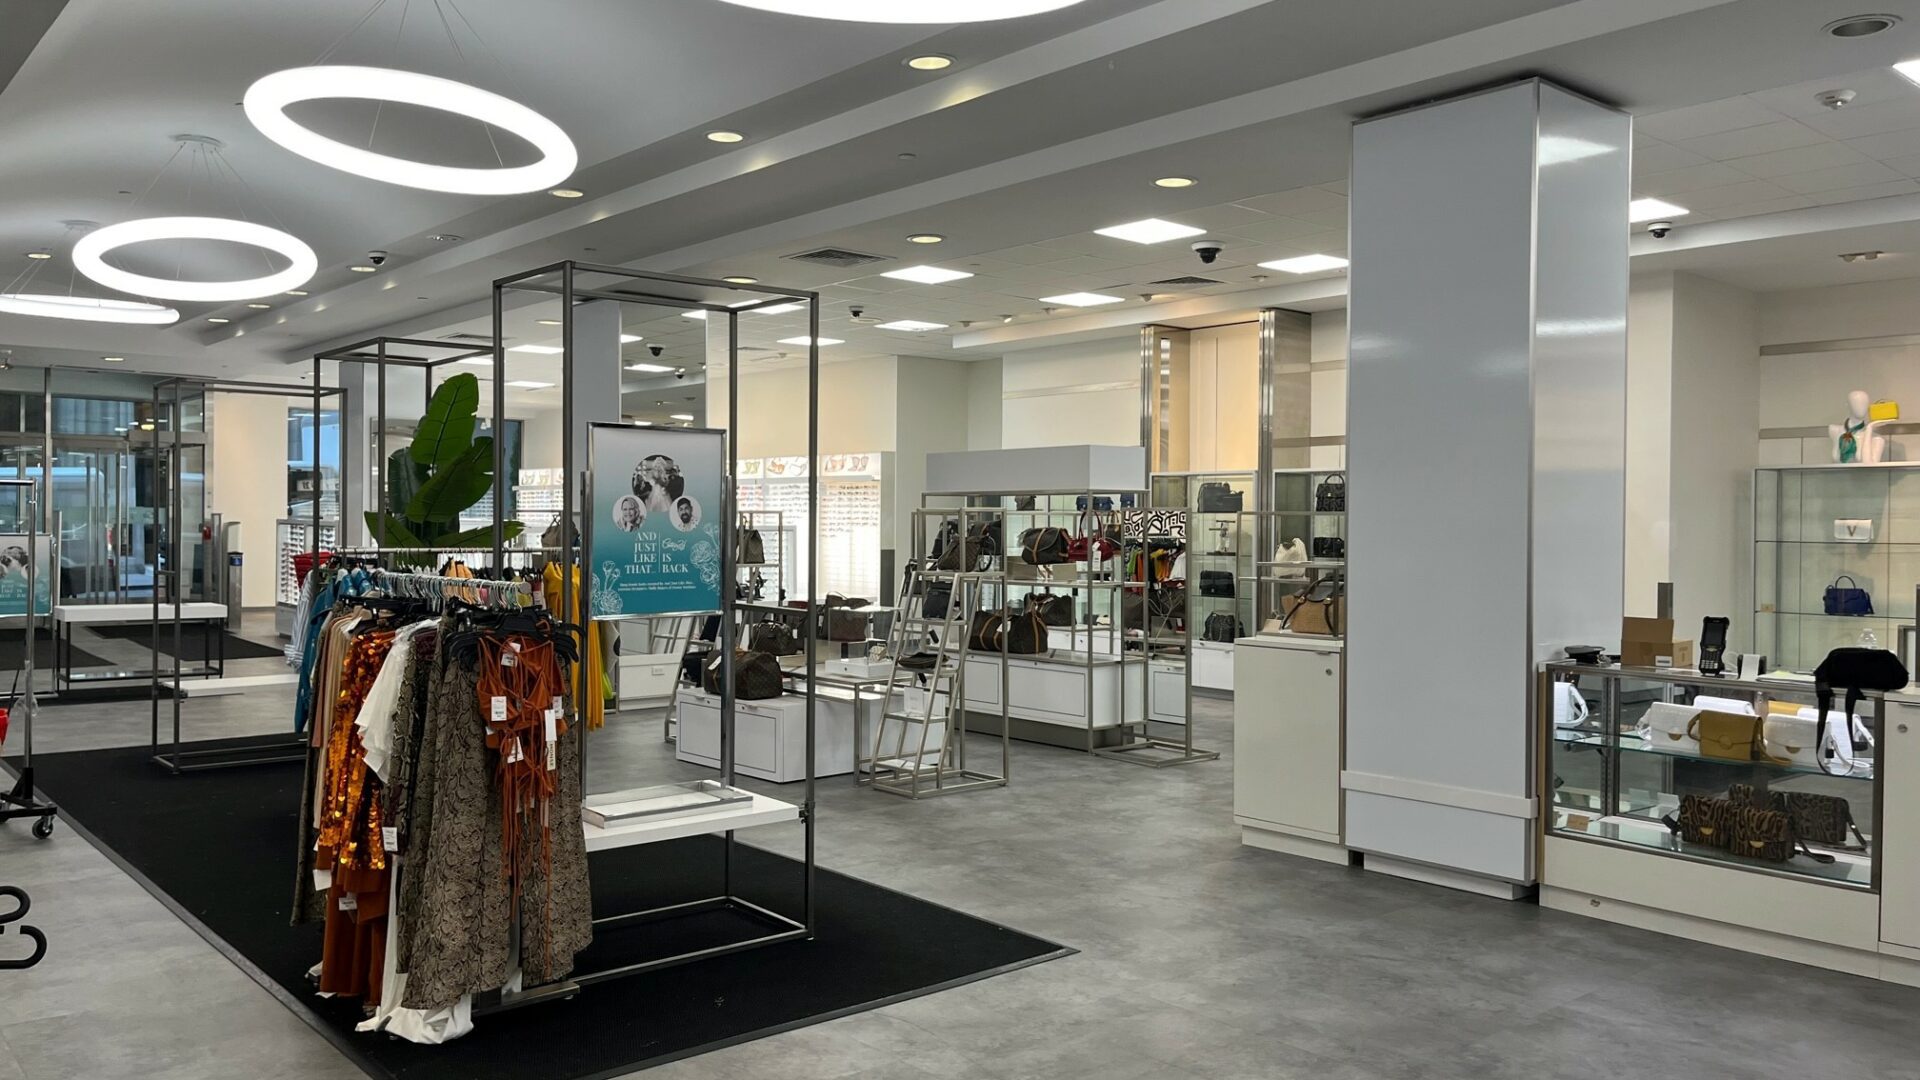 Century 21 first floor: Bags, accessories and homewares.